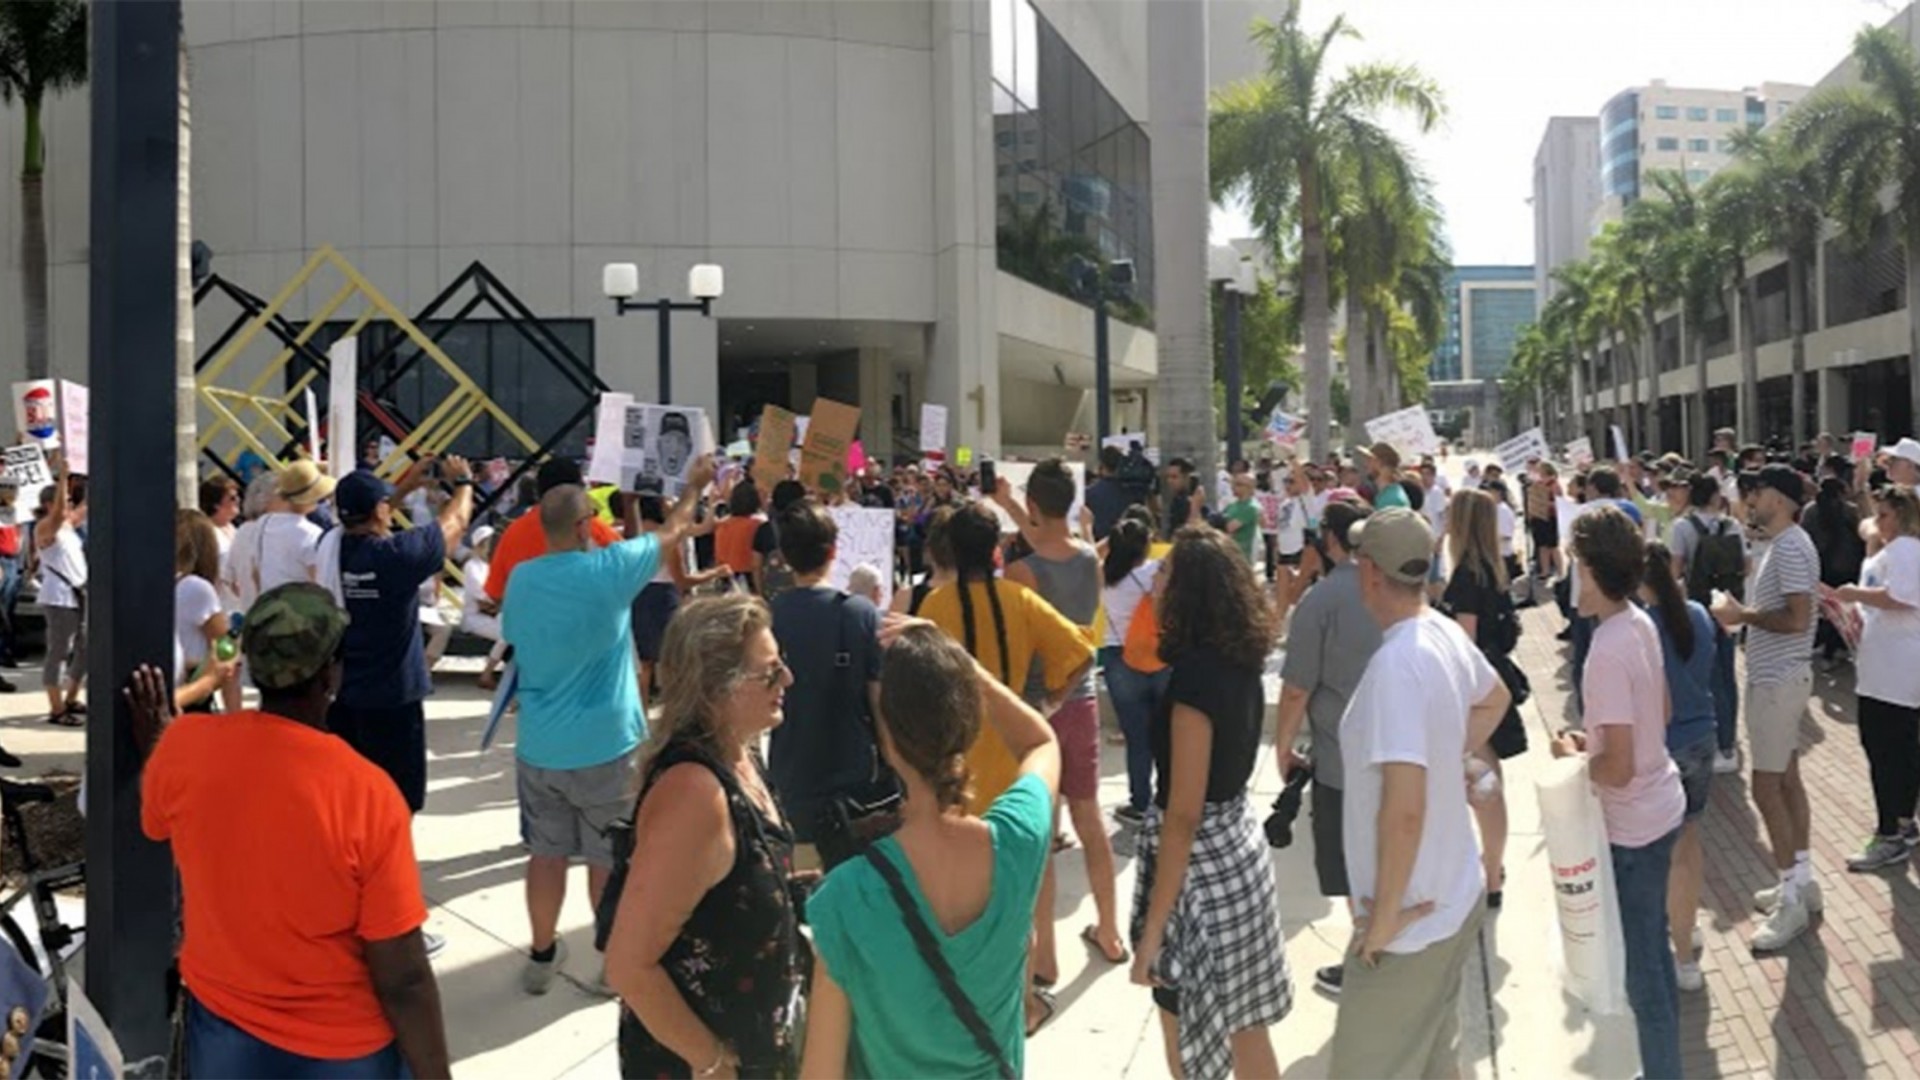 A group of participants of the Serious Games gathered in front of Miami Dade College.